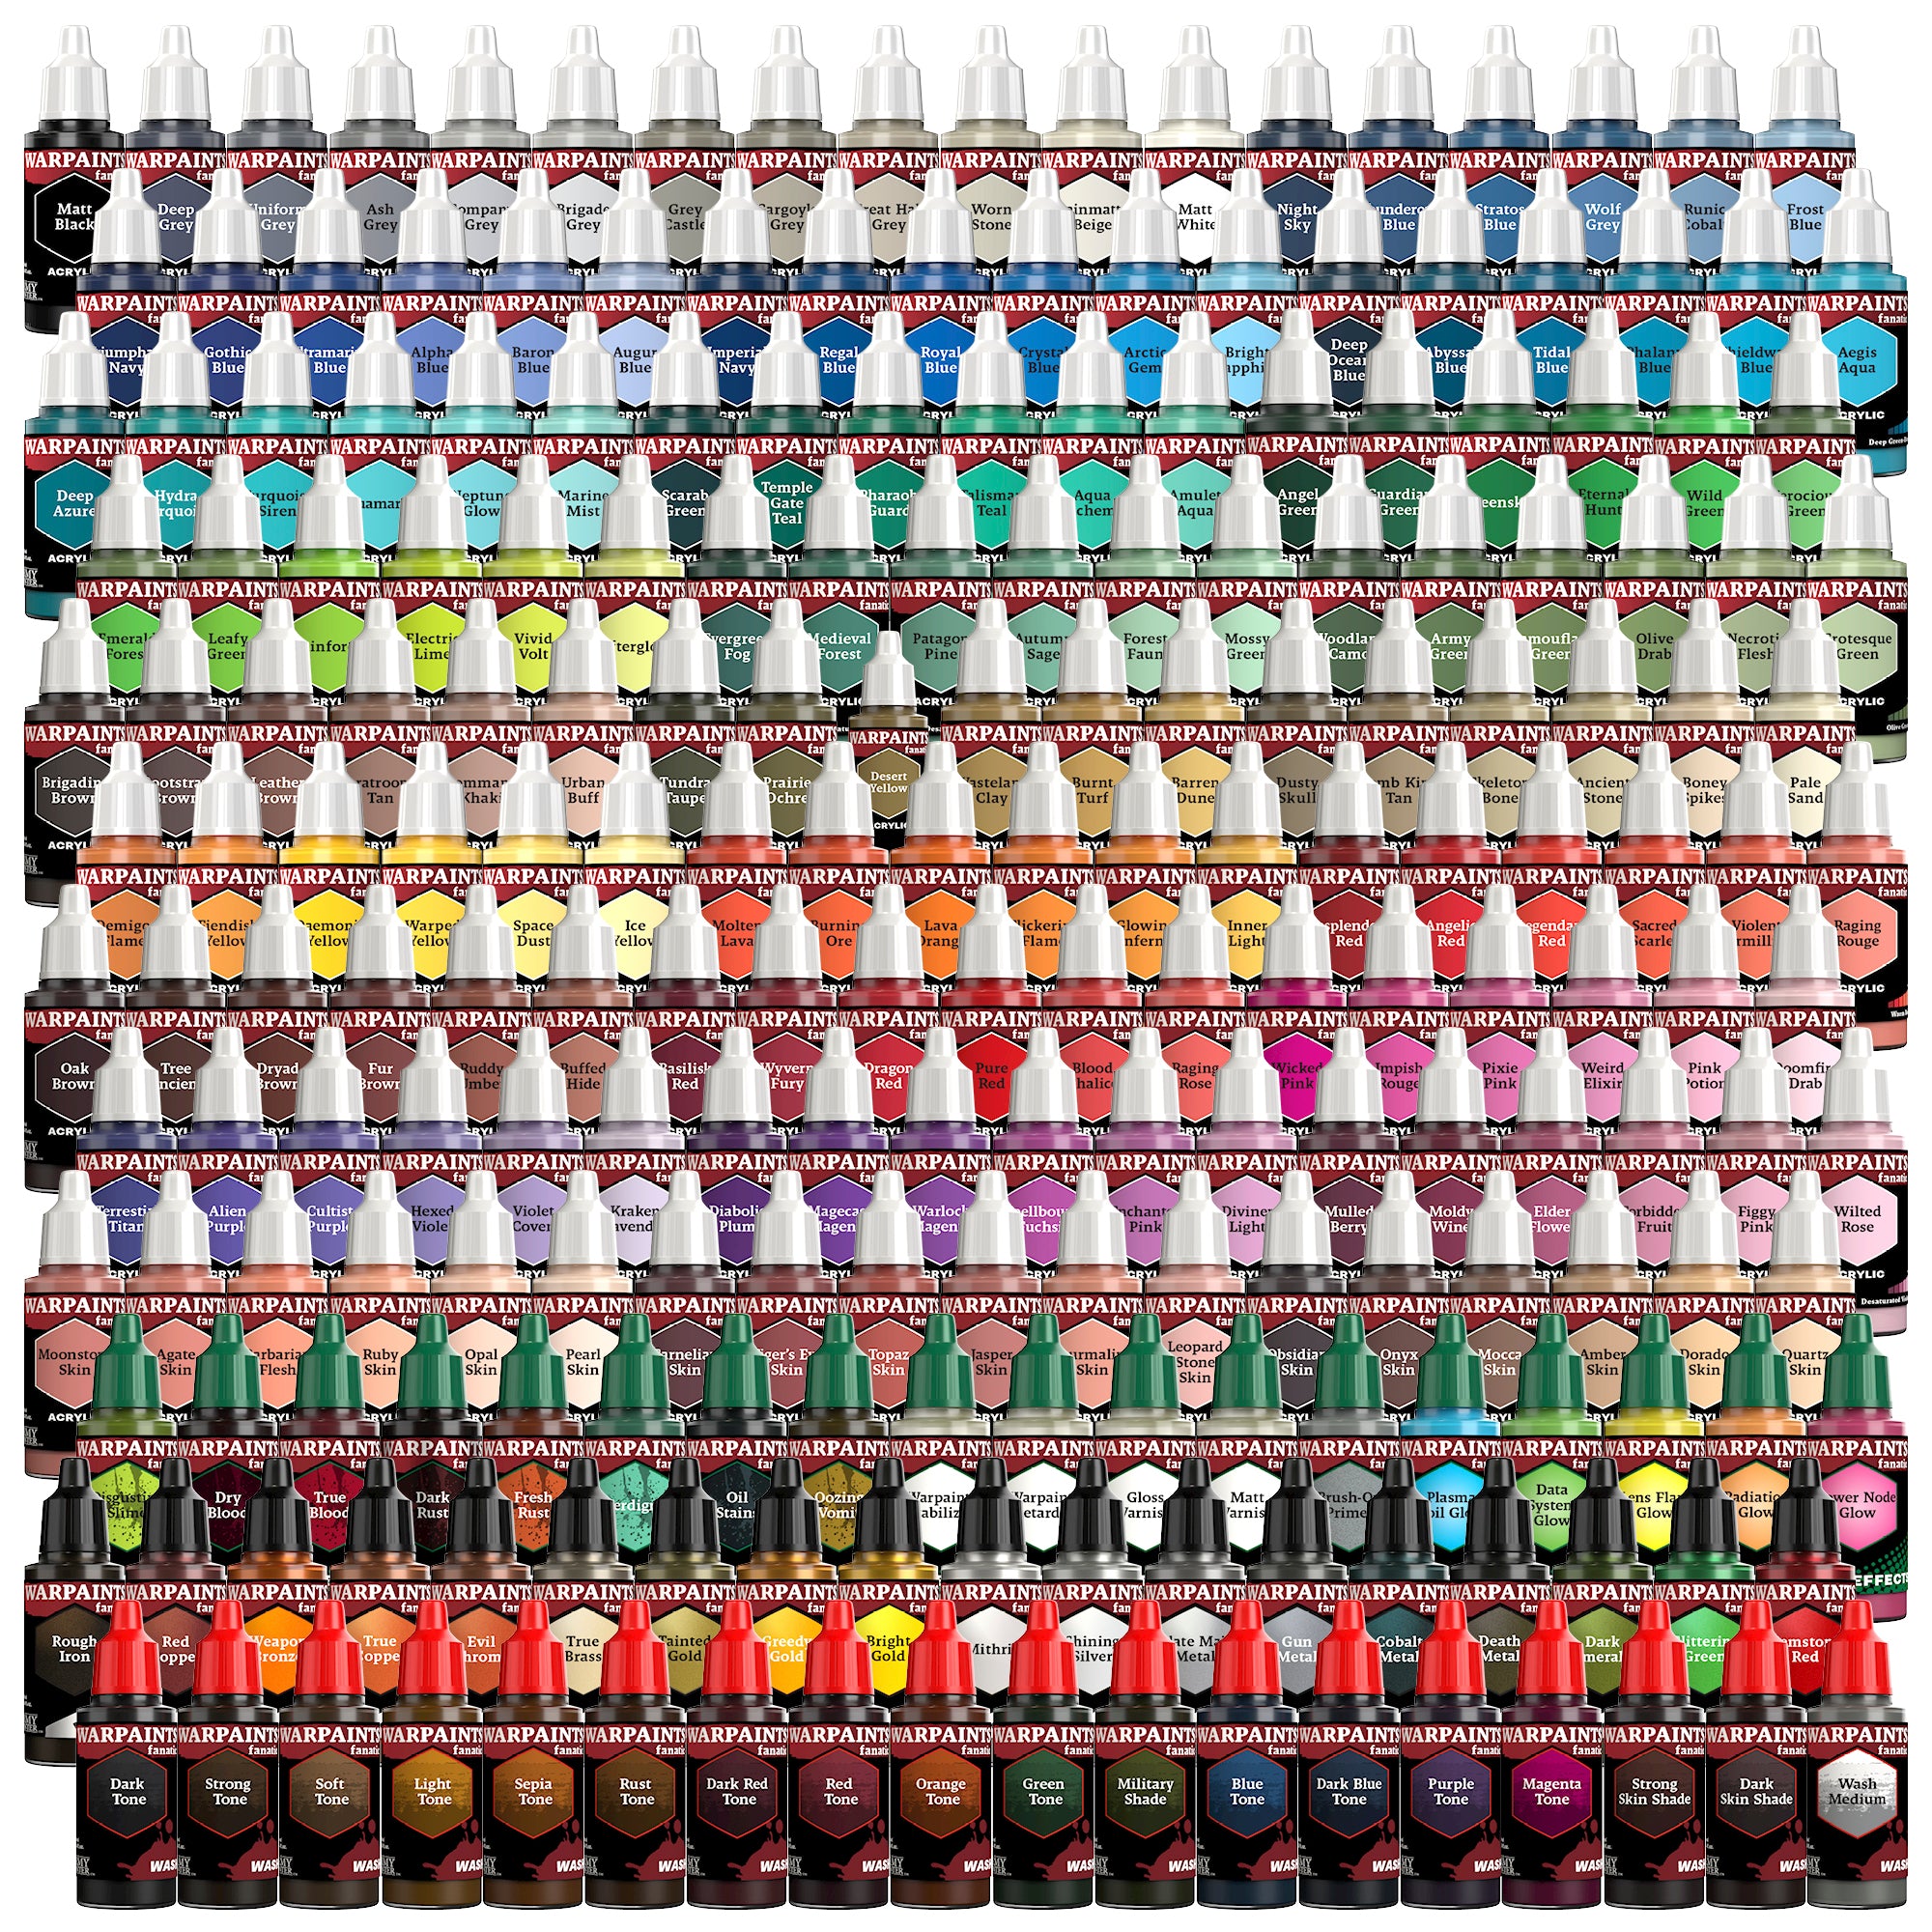 The army painter Warpaints Fanatic: Complete Set Limited Edition